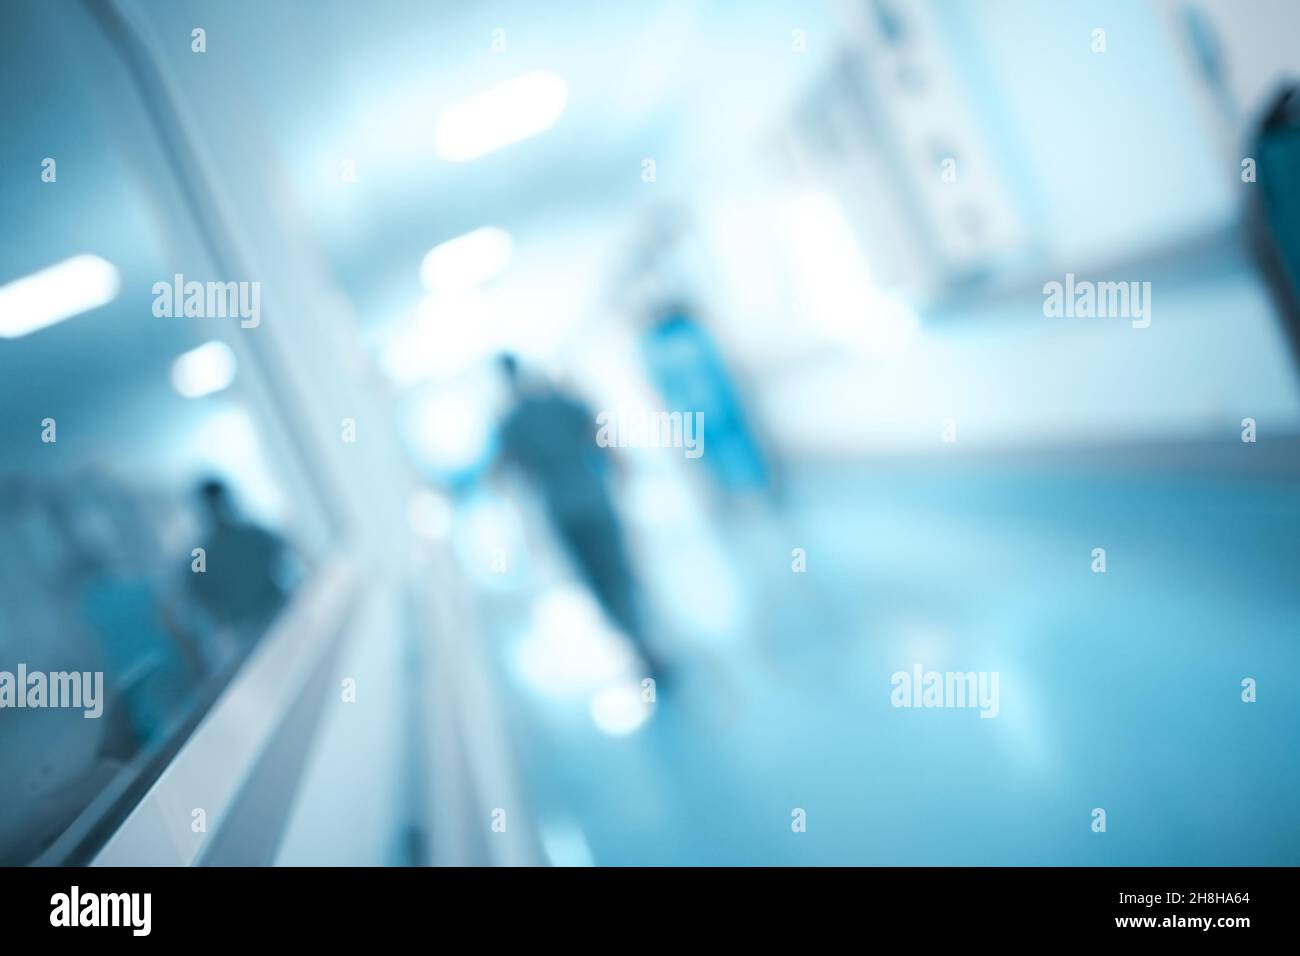 Obscure figure walking through the hospital corridor, unfocused background. Stock Photo